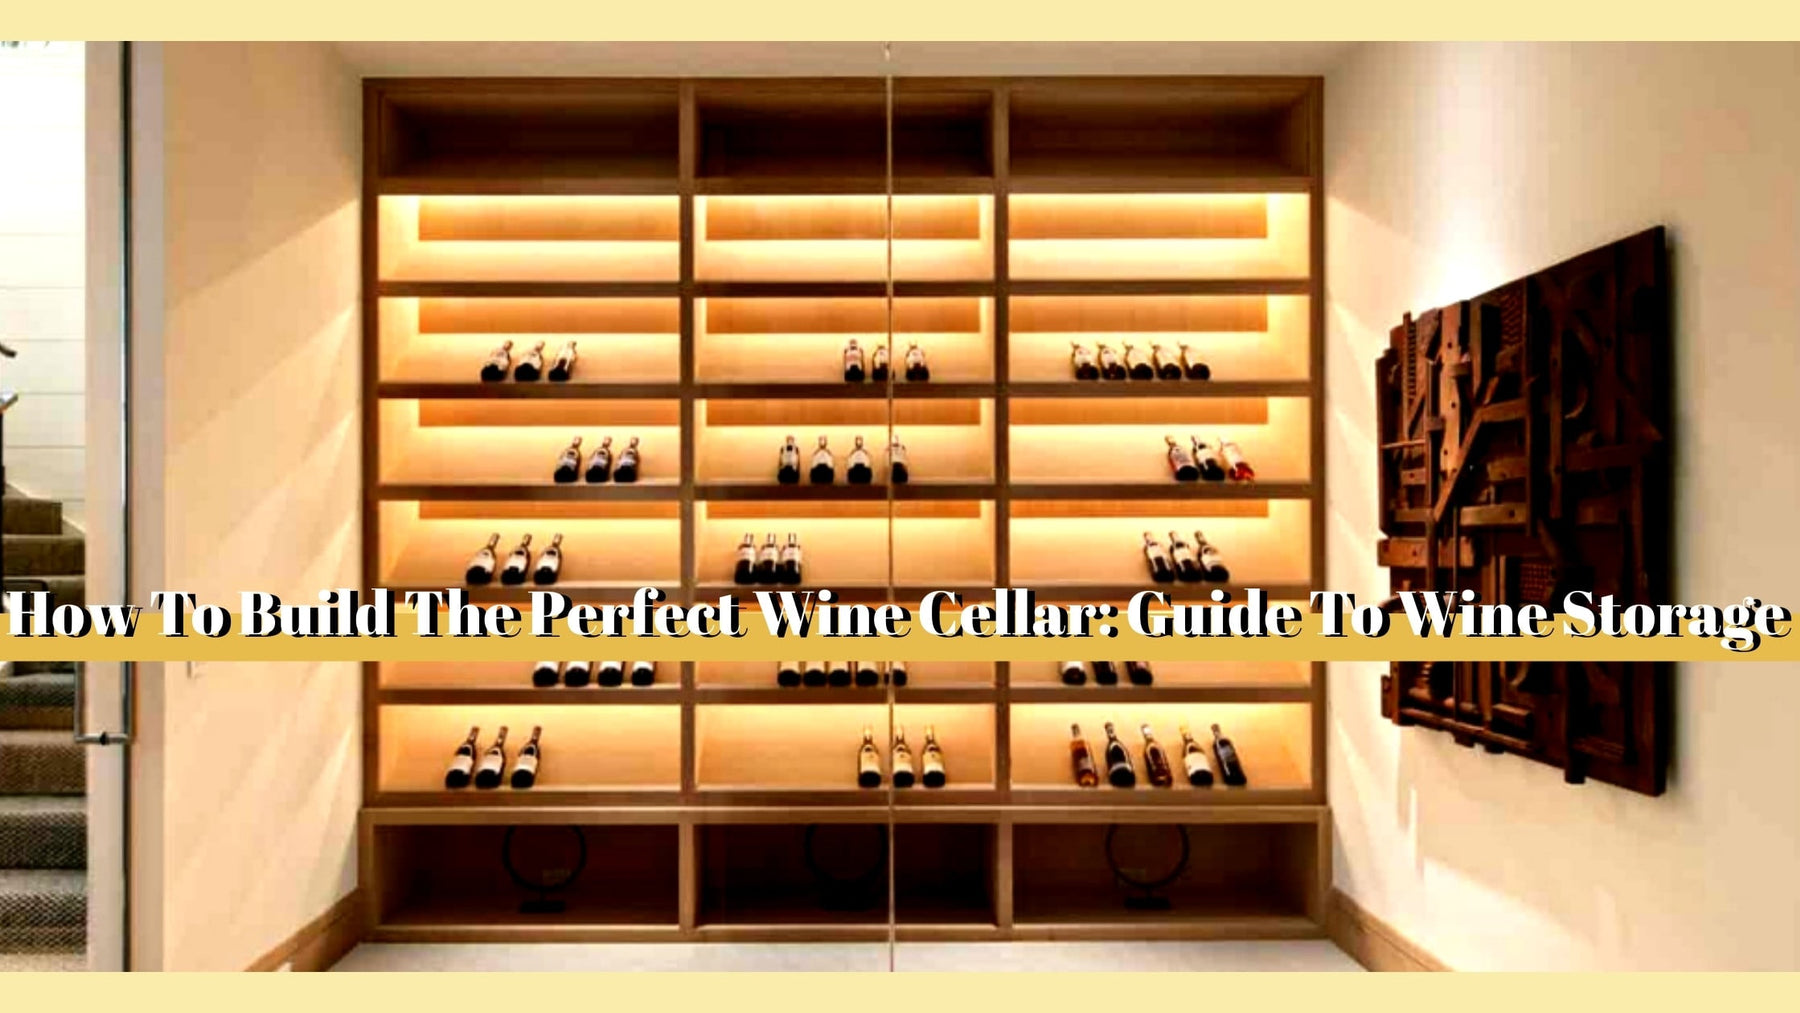 How To Build A Wine Cellar: Guide To Wine Storage  | Wine Coolers Empire - Trusted Dealer